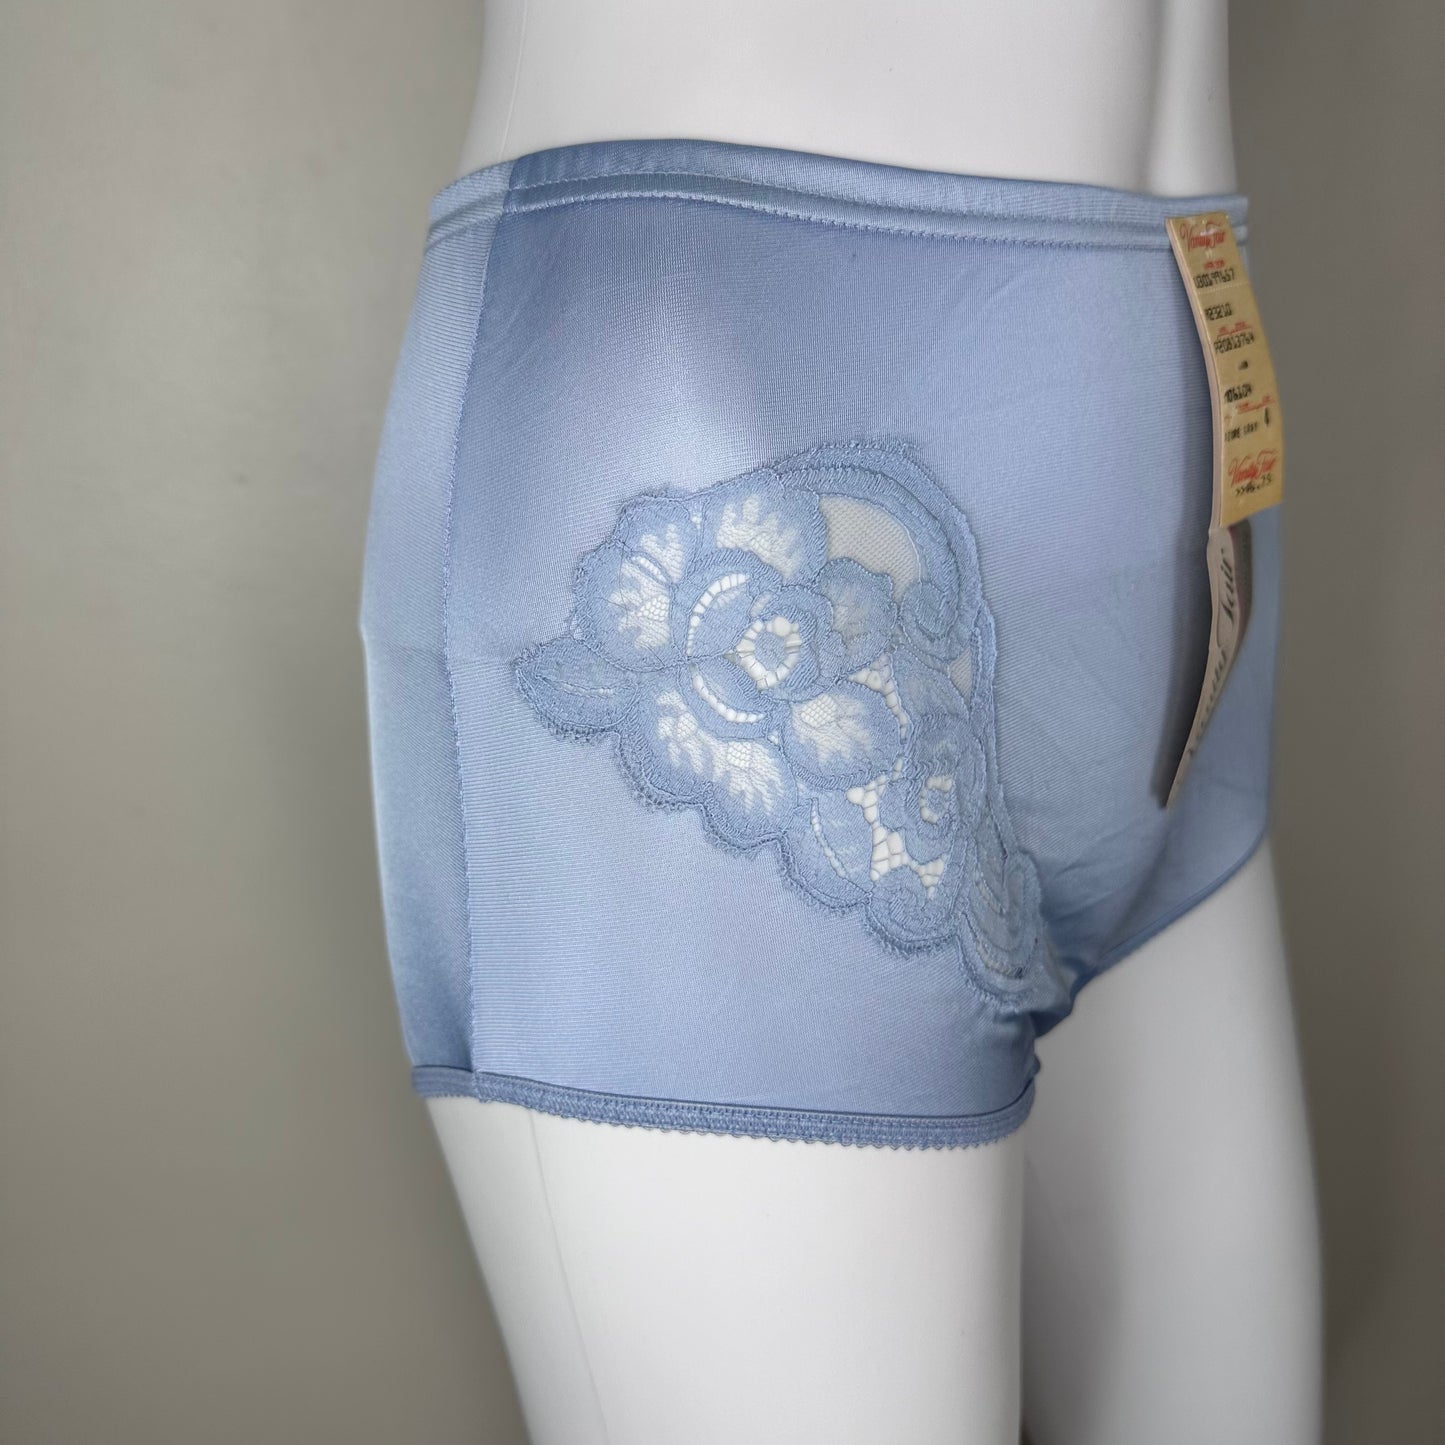 1980s Vanity Fair Nylon Panties, Lace Piquant Sophisticated Elegance Size 4, Pastel Blue, Azure Gray, Deadstock with Tags